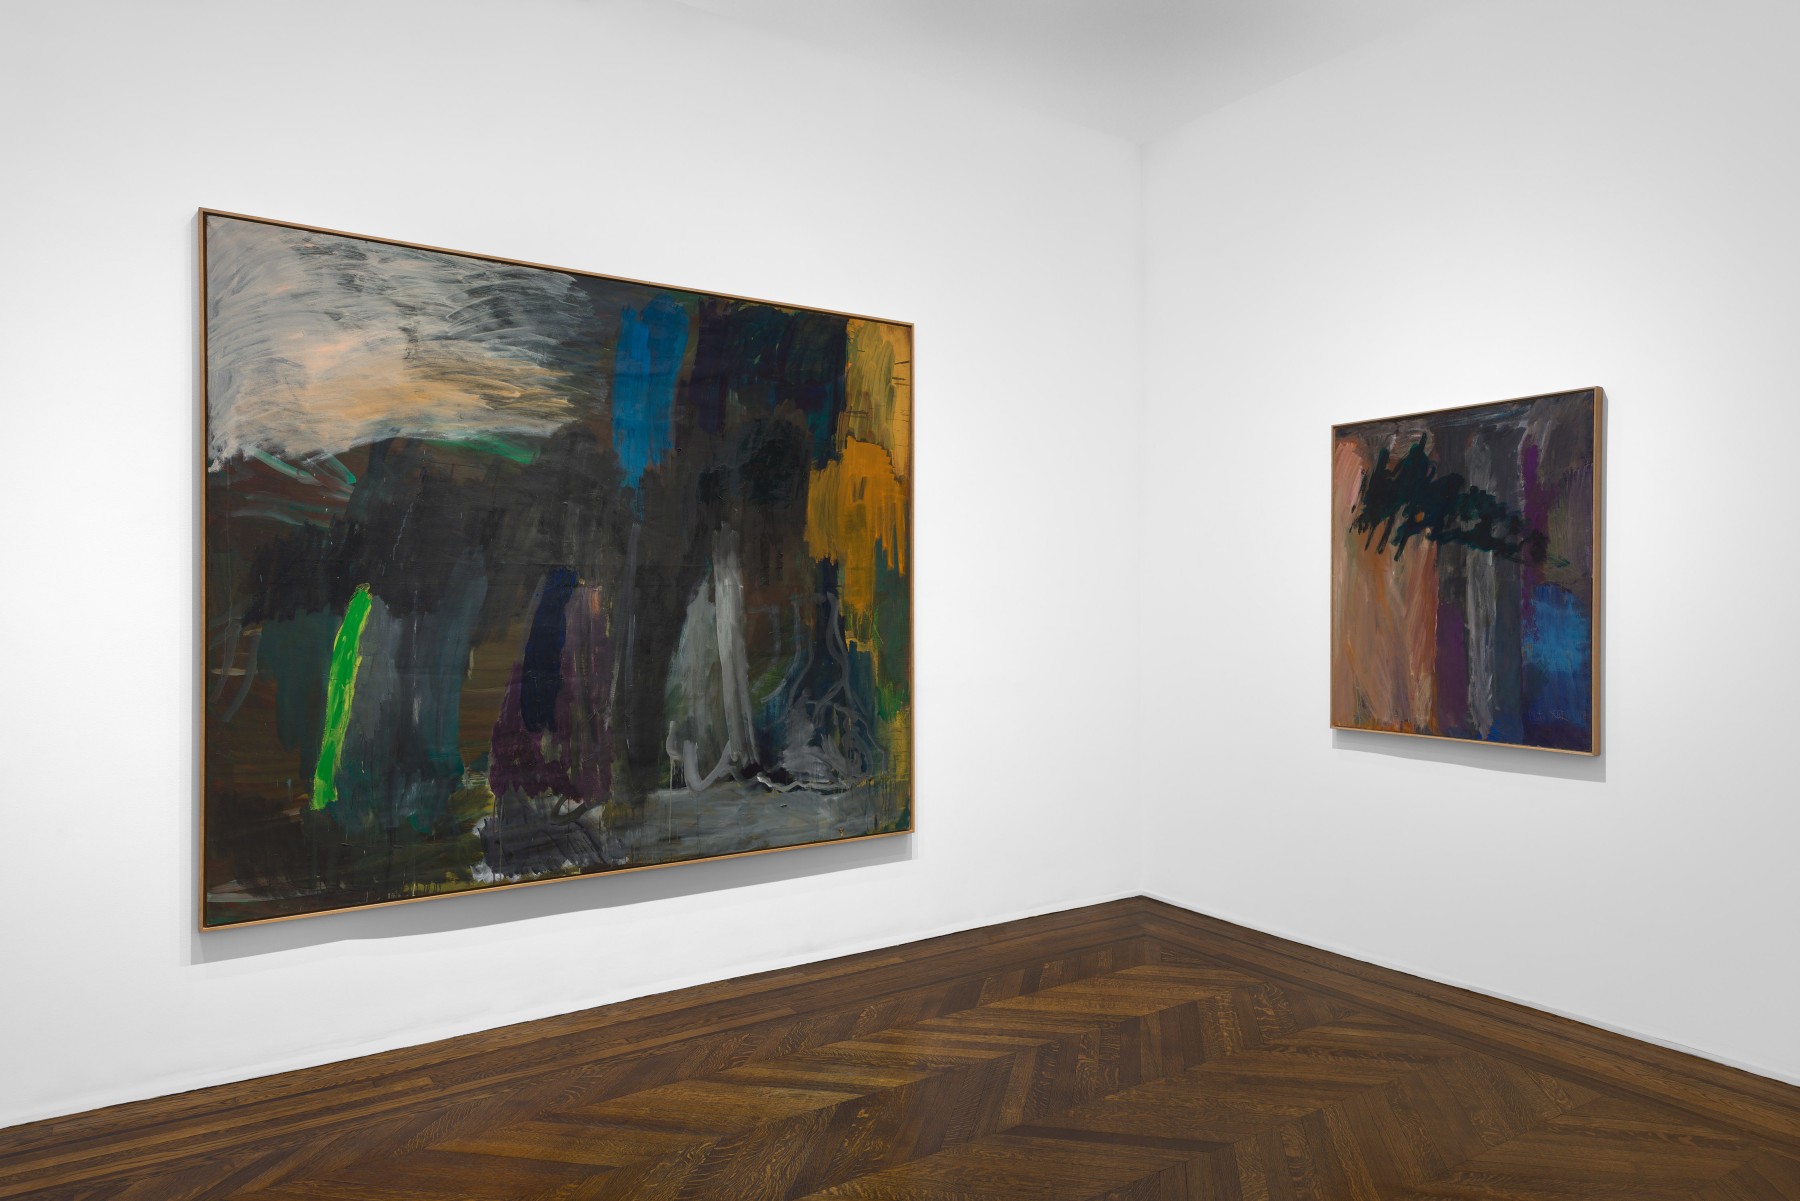 PER KIRKEBY, Paintings and Bronzes from the 1980s, New York, 2018, Installation Image 14